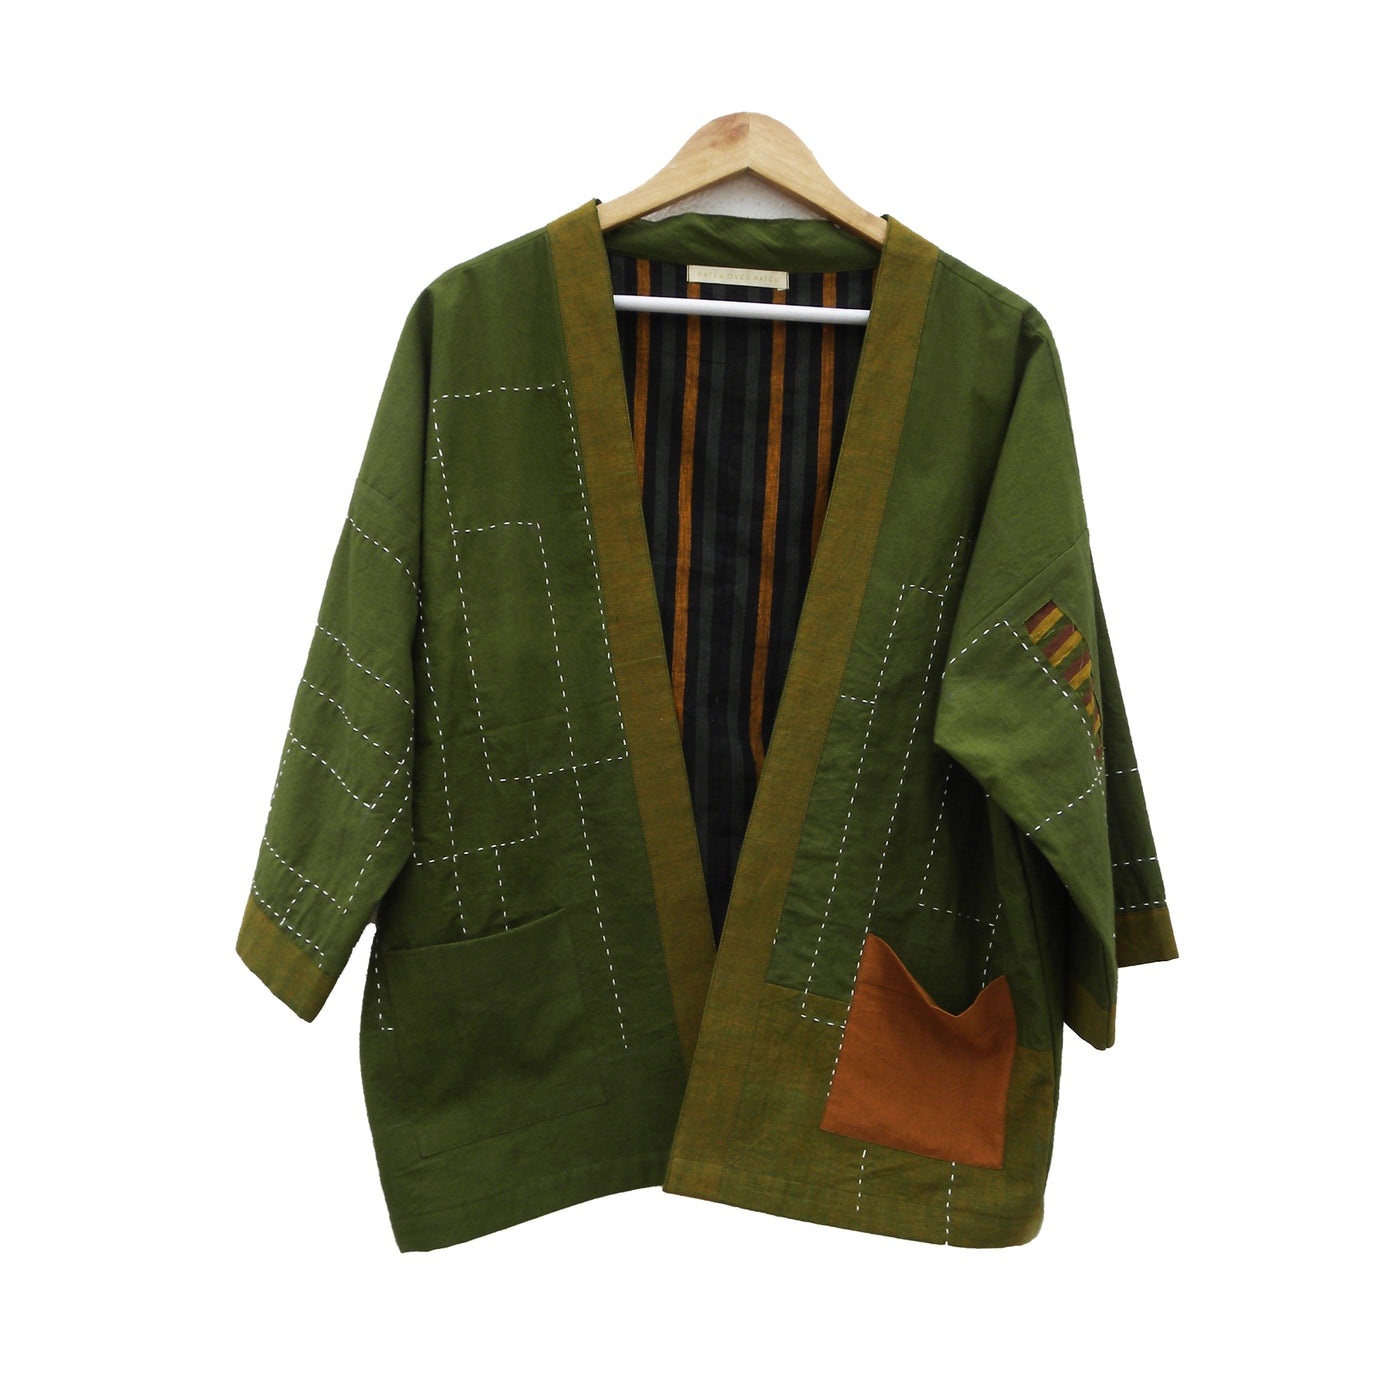 jacket in Green colour along with contrasting stitch lines